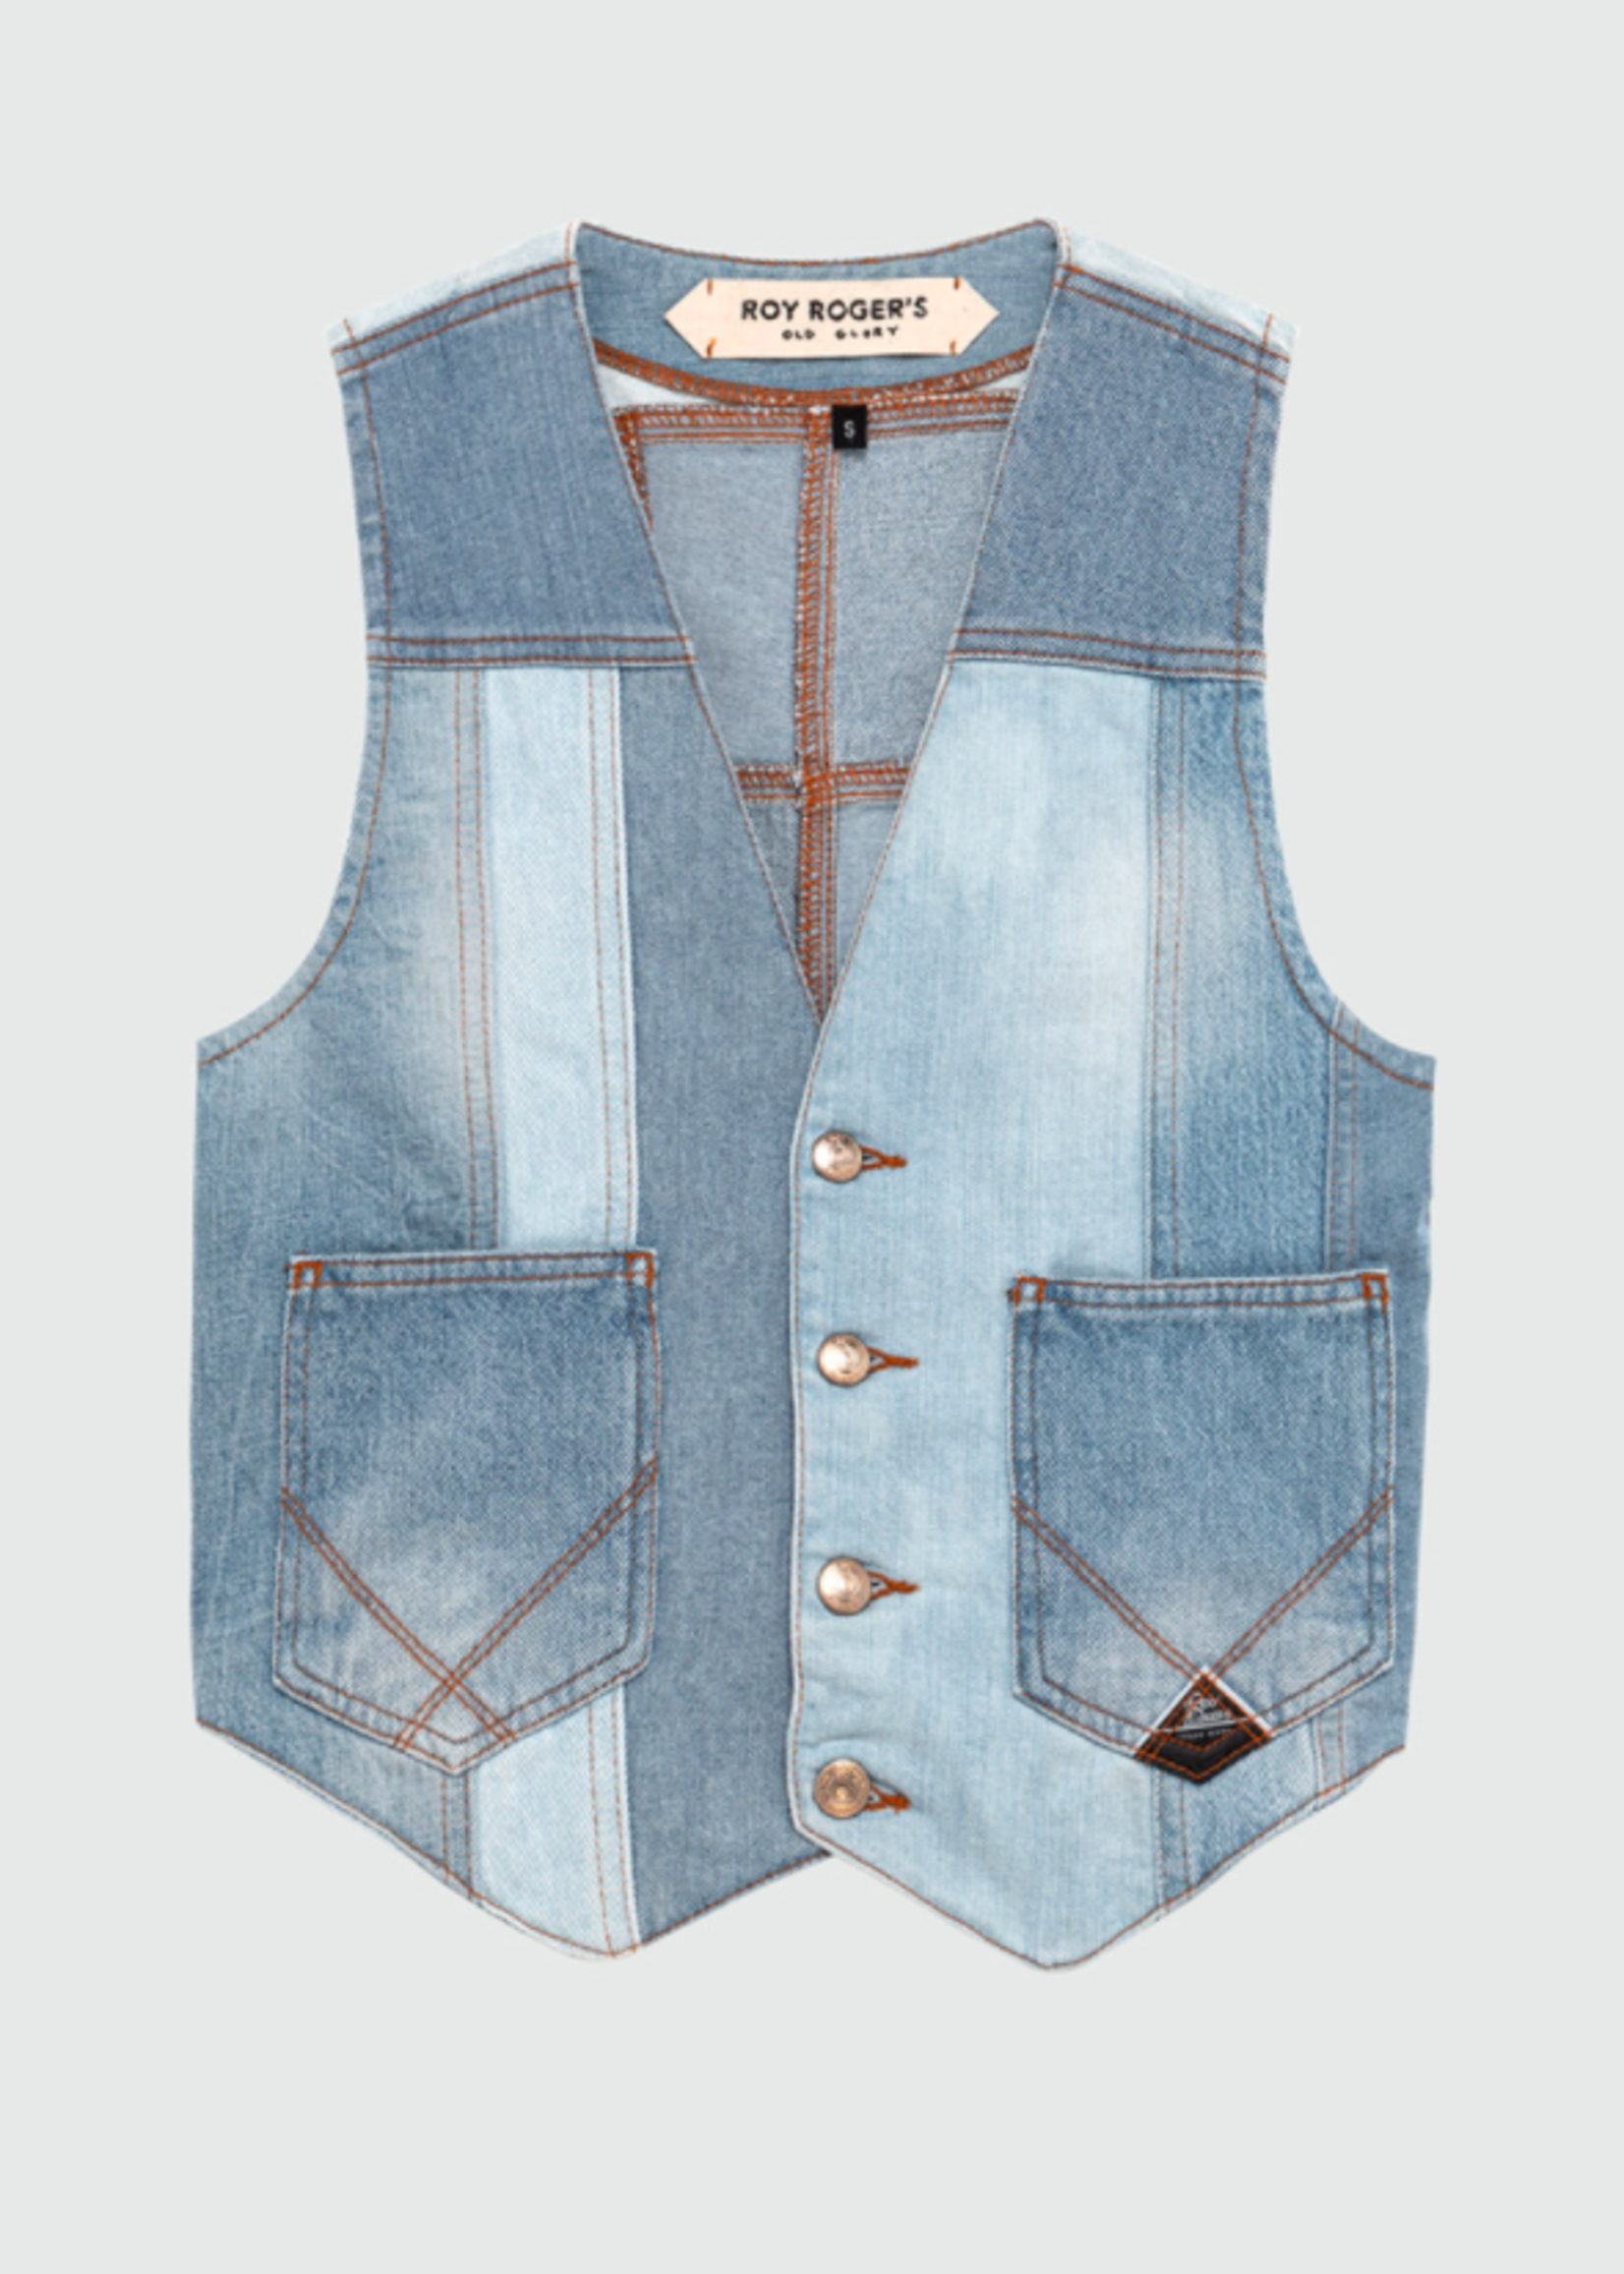 Roy Roger's Roy Rodger's Real Vintage Up Cycled Vest